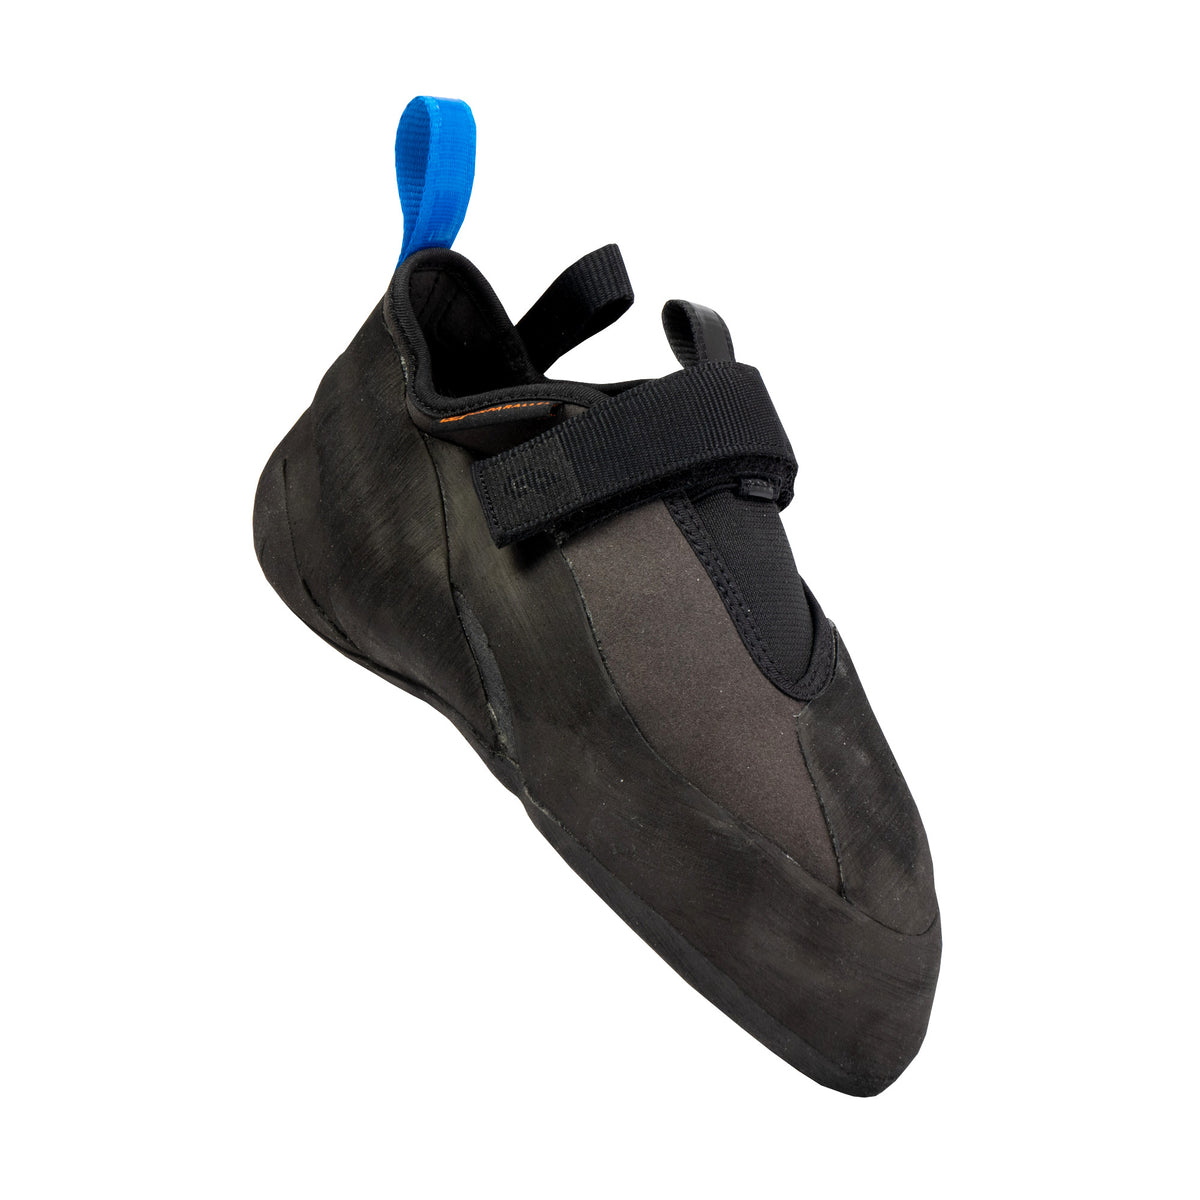 Tilted Unparallel Regulus climbing shoe showing the Large rubber toe patch and slipper construction